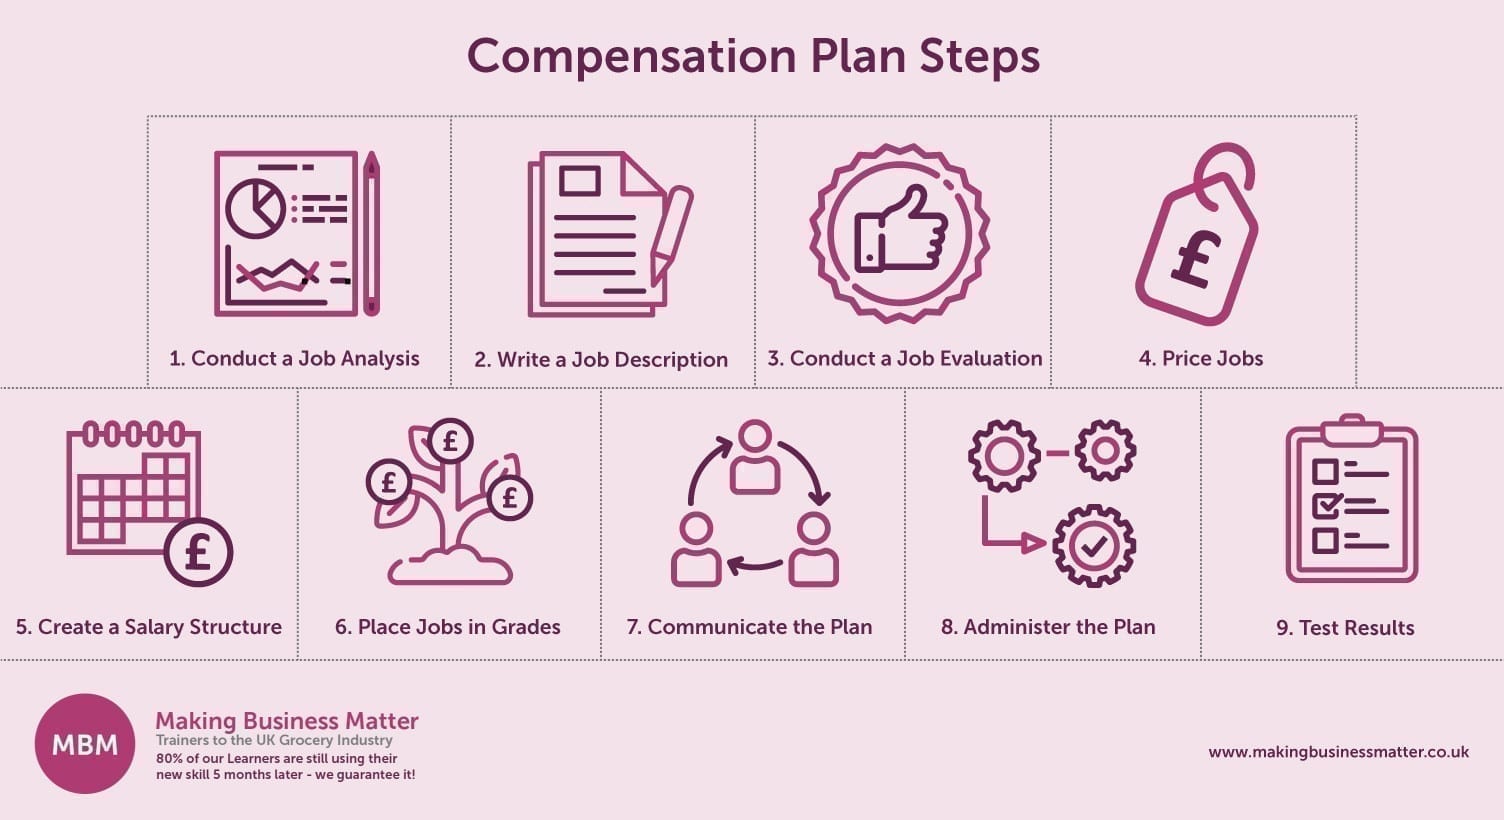 MBM banner with 9 sections and icons showing compensation plan steps